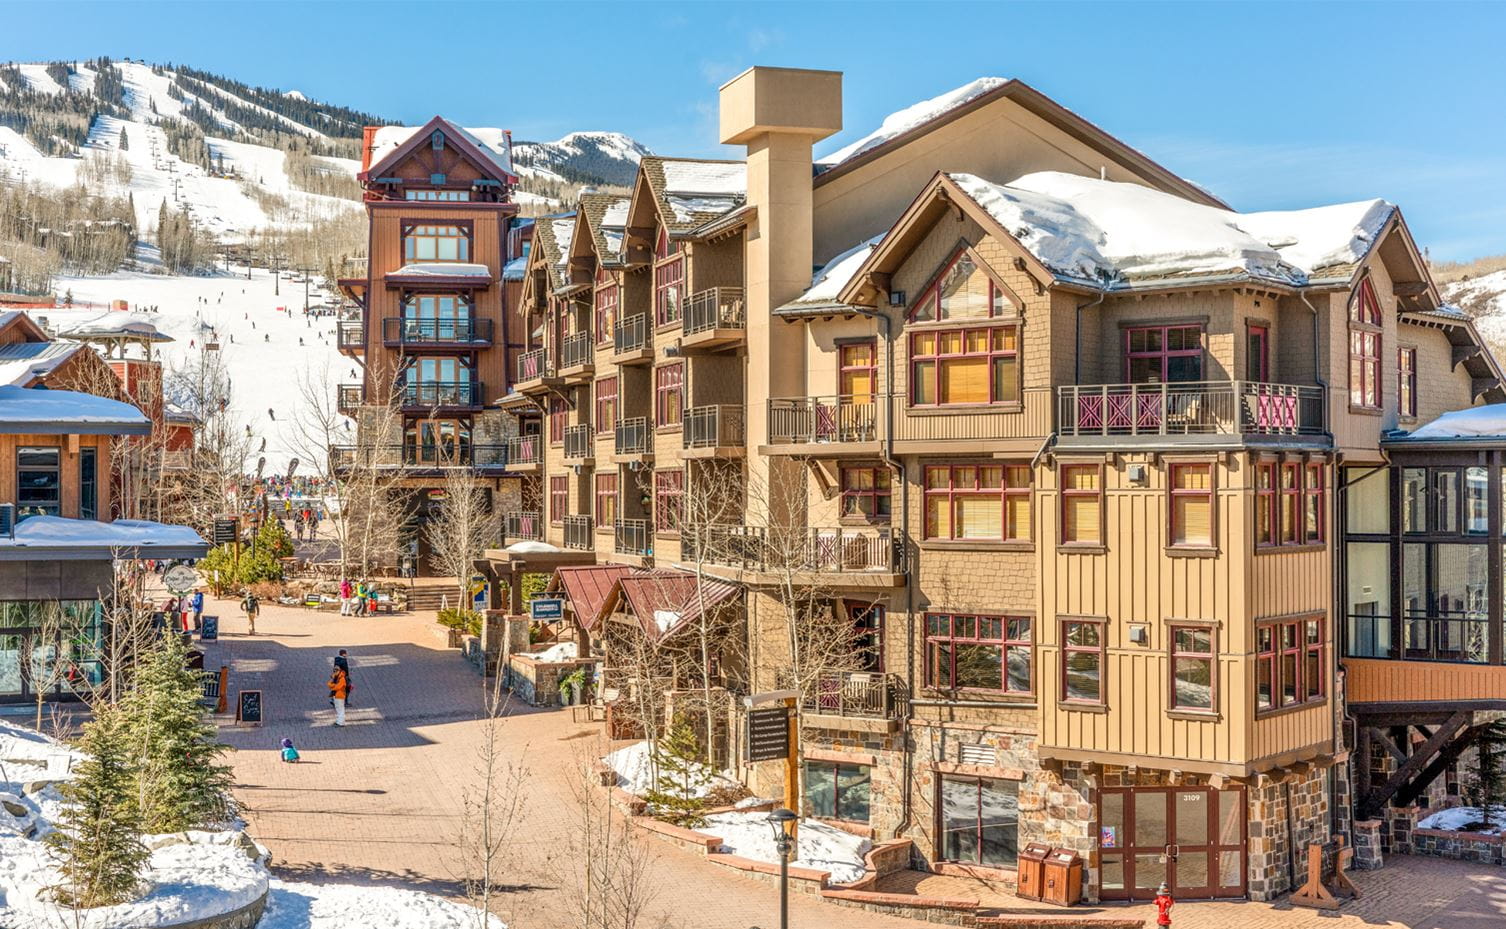 Capitol Peak Lodge in Snowmass Village, CO